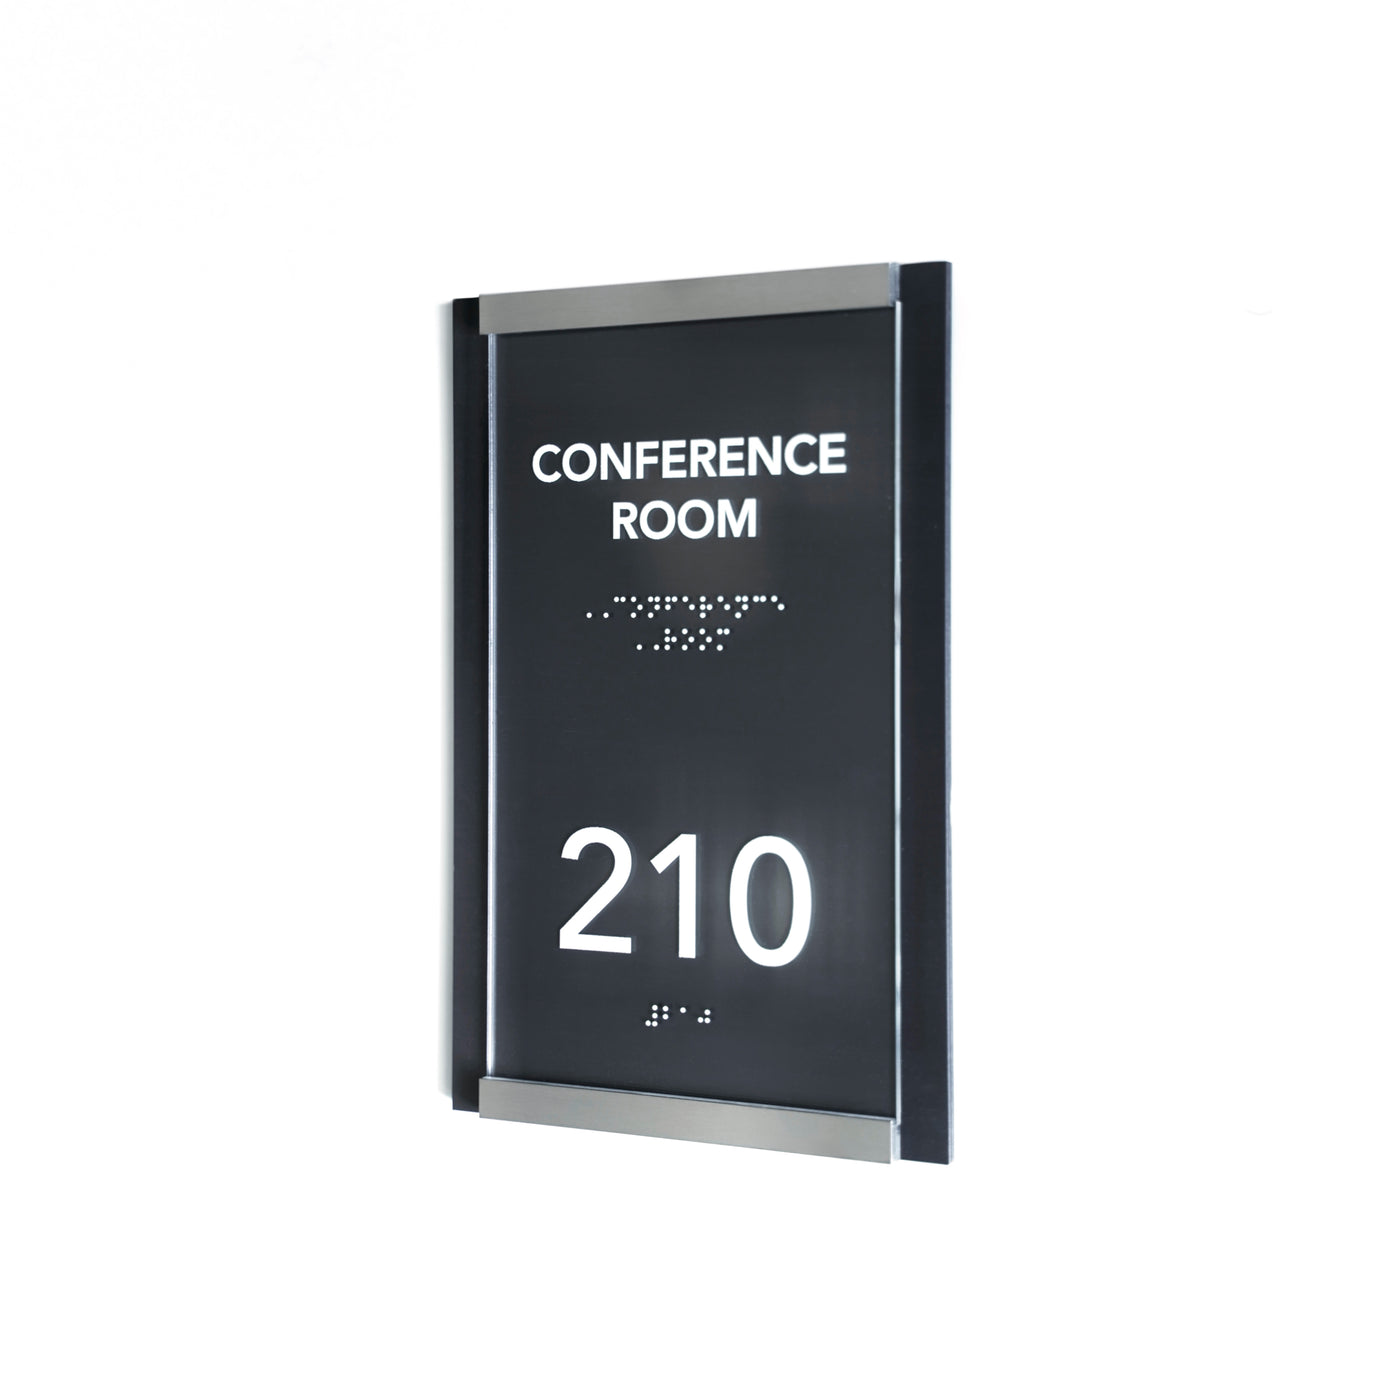 a sign for a conference room on a white background